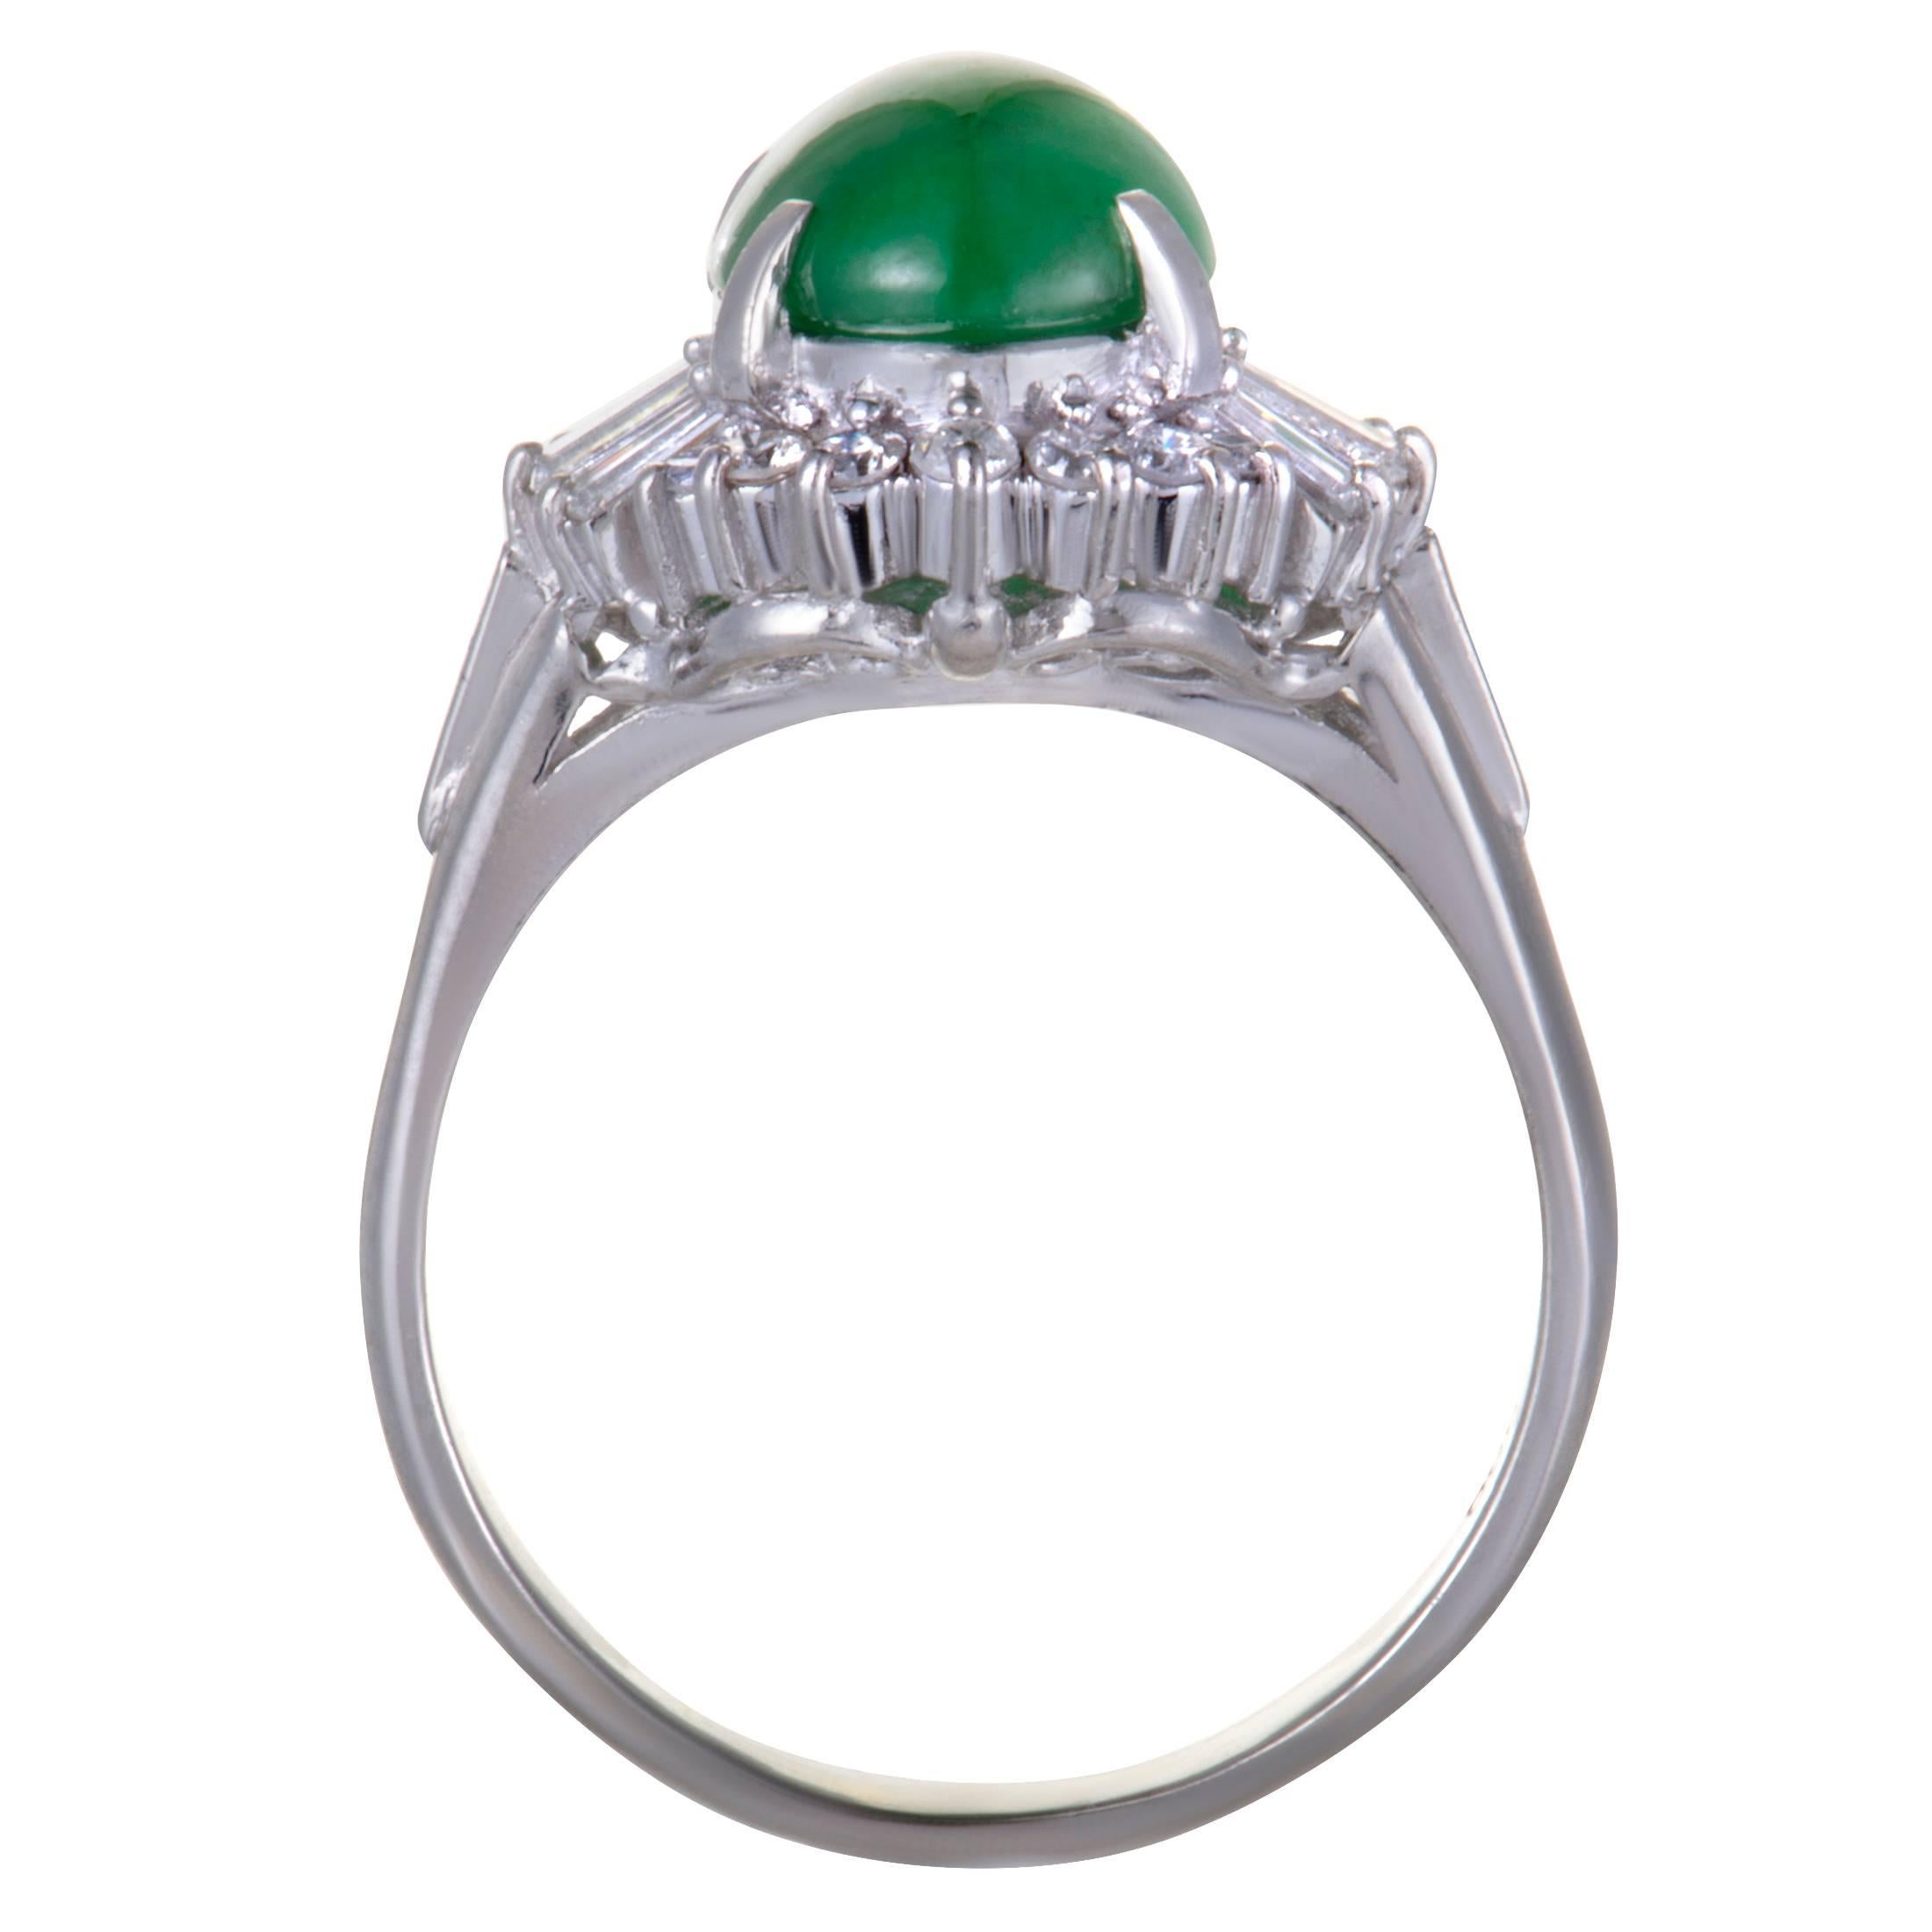 Embellished in 0.50ct diamonds and a magnificent 3.38ct green jade cabochon, this superb ring embodies glamour and splendor. Stunningly crafted in classy platinum, this attractive ring has a spellbinding appeal.
Ring Size: 7.5
Ring Top Dimensions: